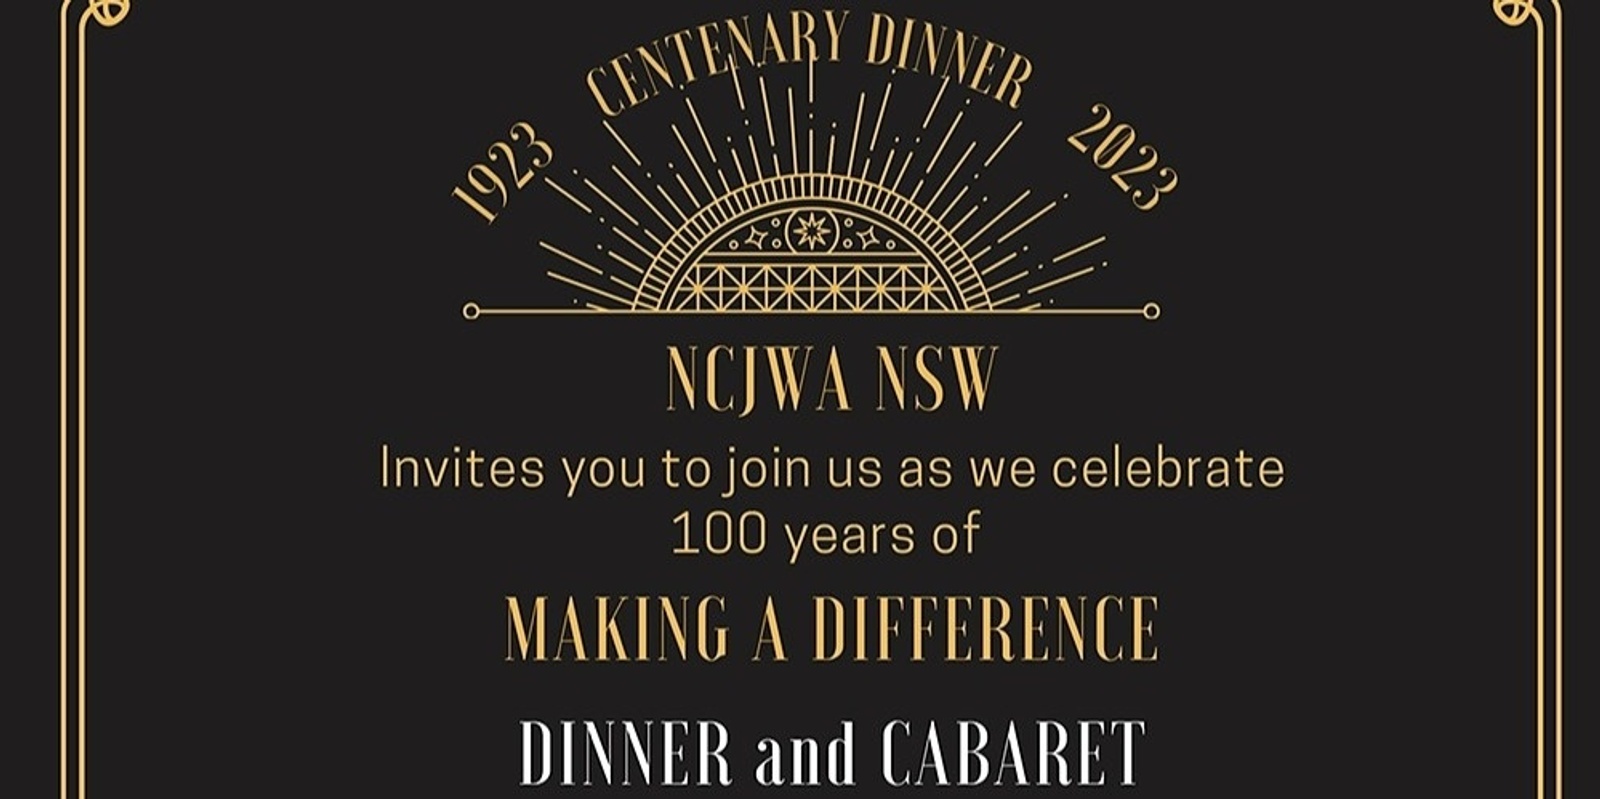 NCJWA NSW Centenary Gala Dinner - please contact the office on 9363 0257